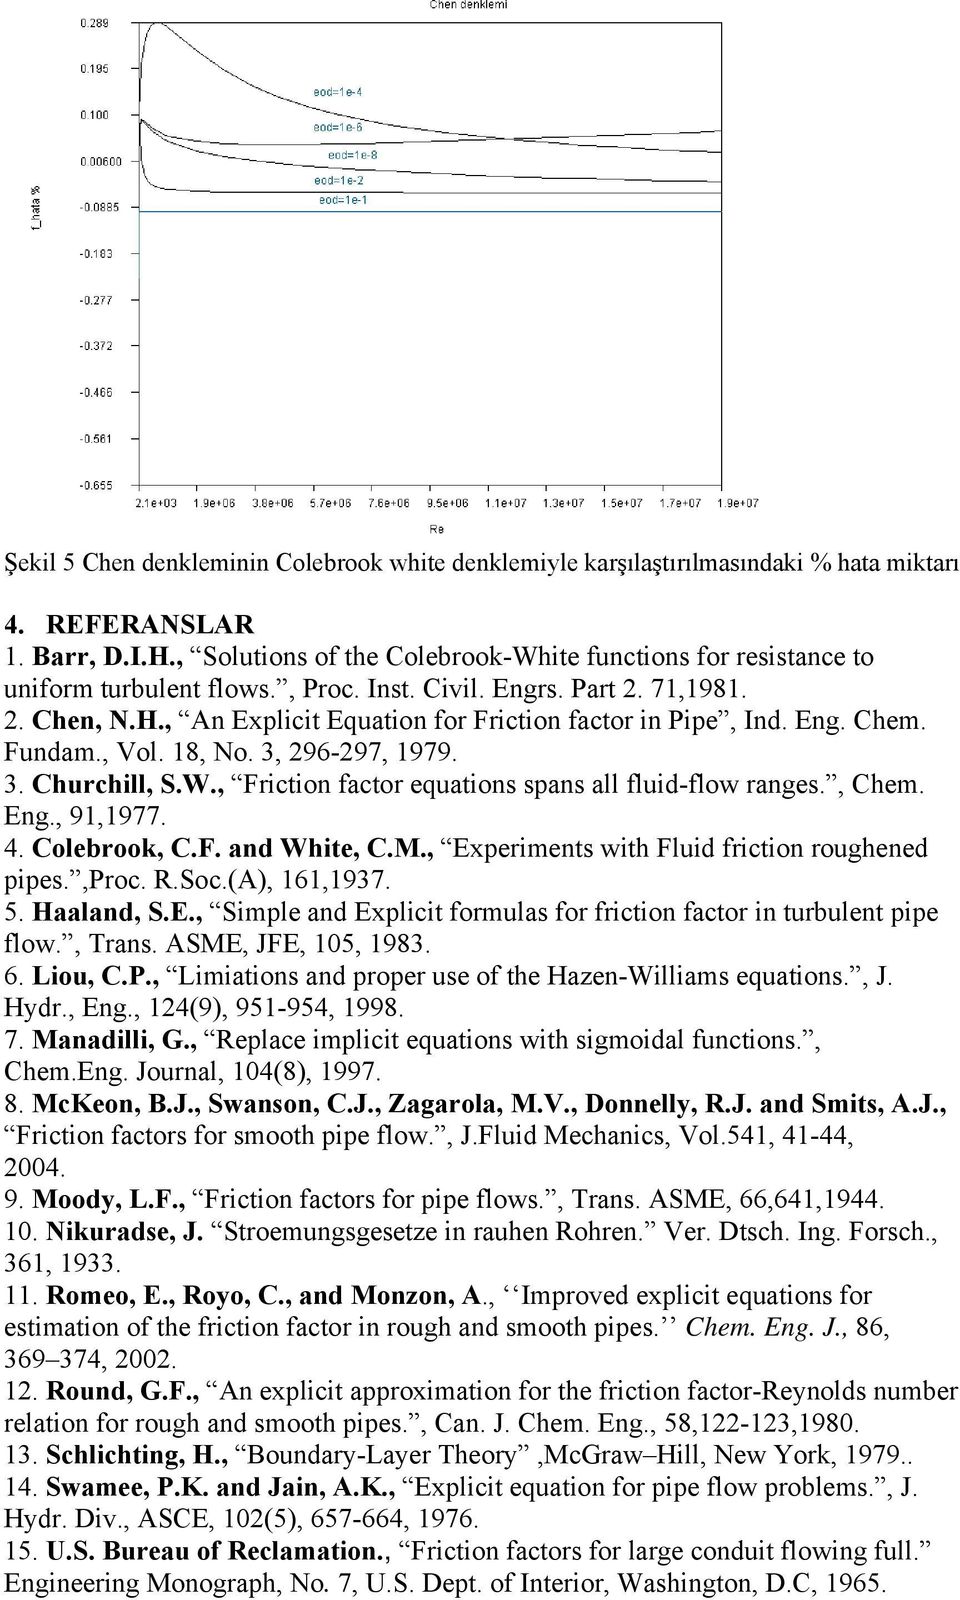 Eng. Chem. Fundam., Vol. 18, No. 3, 96-97, 1979. 3. Churchill, S.W., Friction factor equations spans all fluid-flow ranges., Chem. Eng., 91,1977. 4. Colebrook, C.F. and White, C.M.